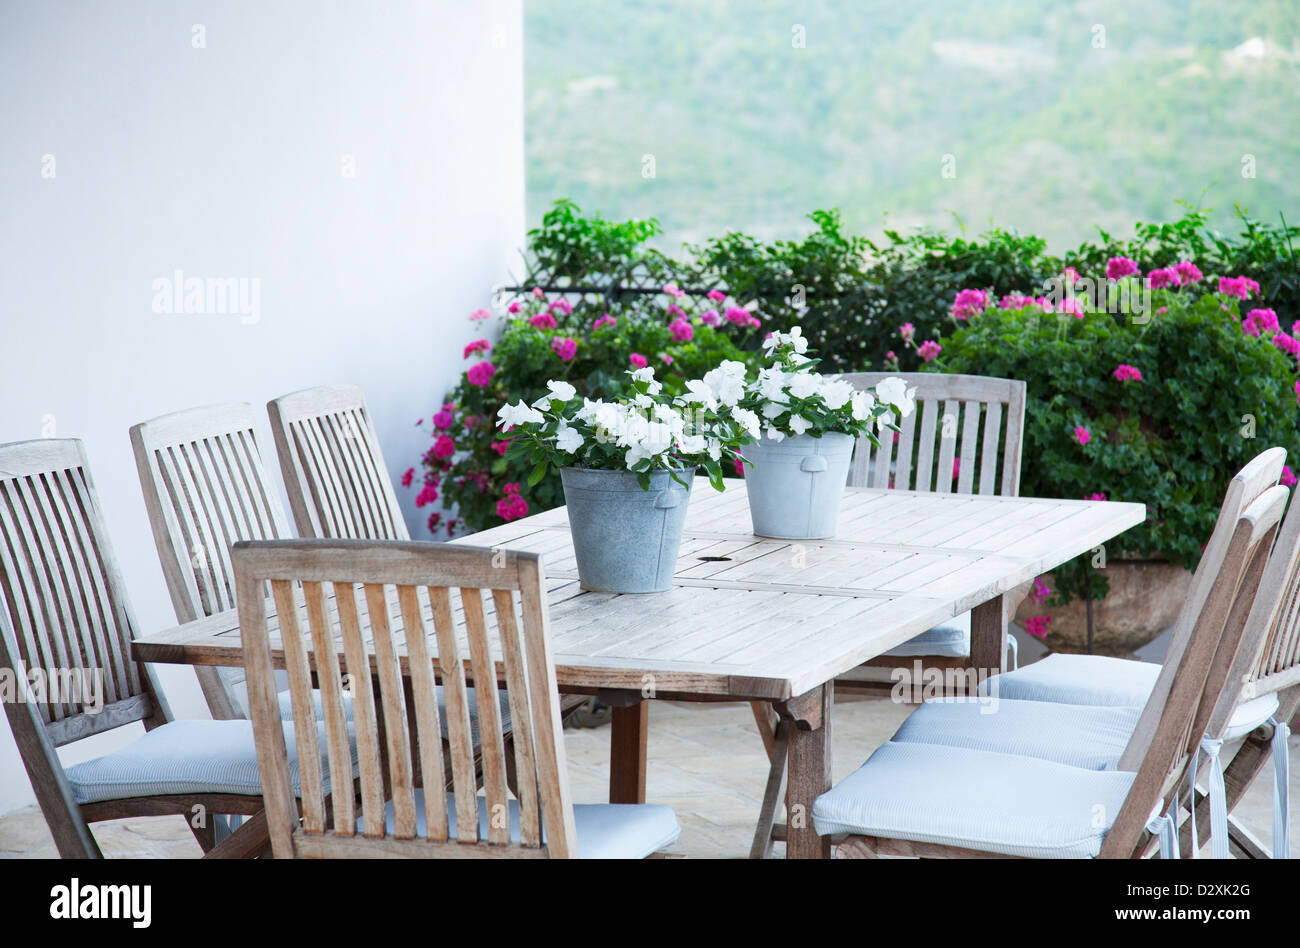 Potted flowers on patio table Stock Photo